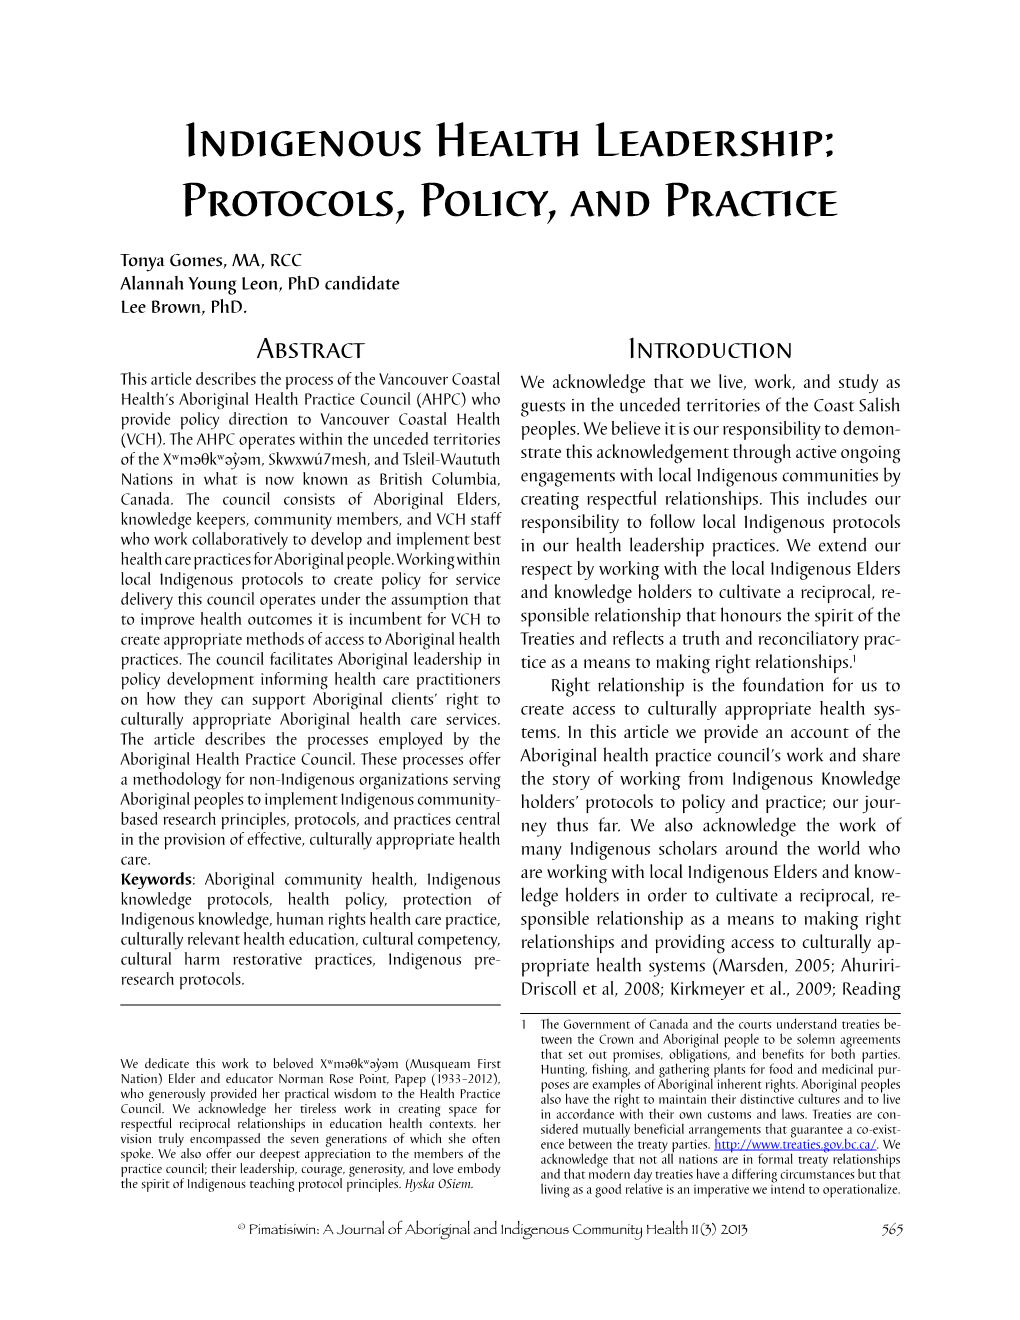 Indigenous Health Leadership: Protocols, Policy, and Practice